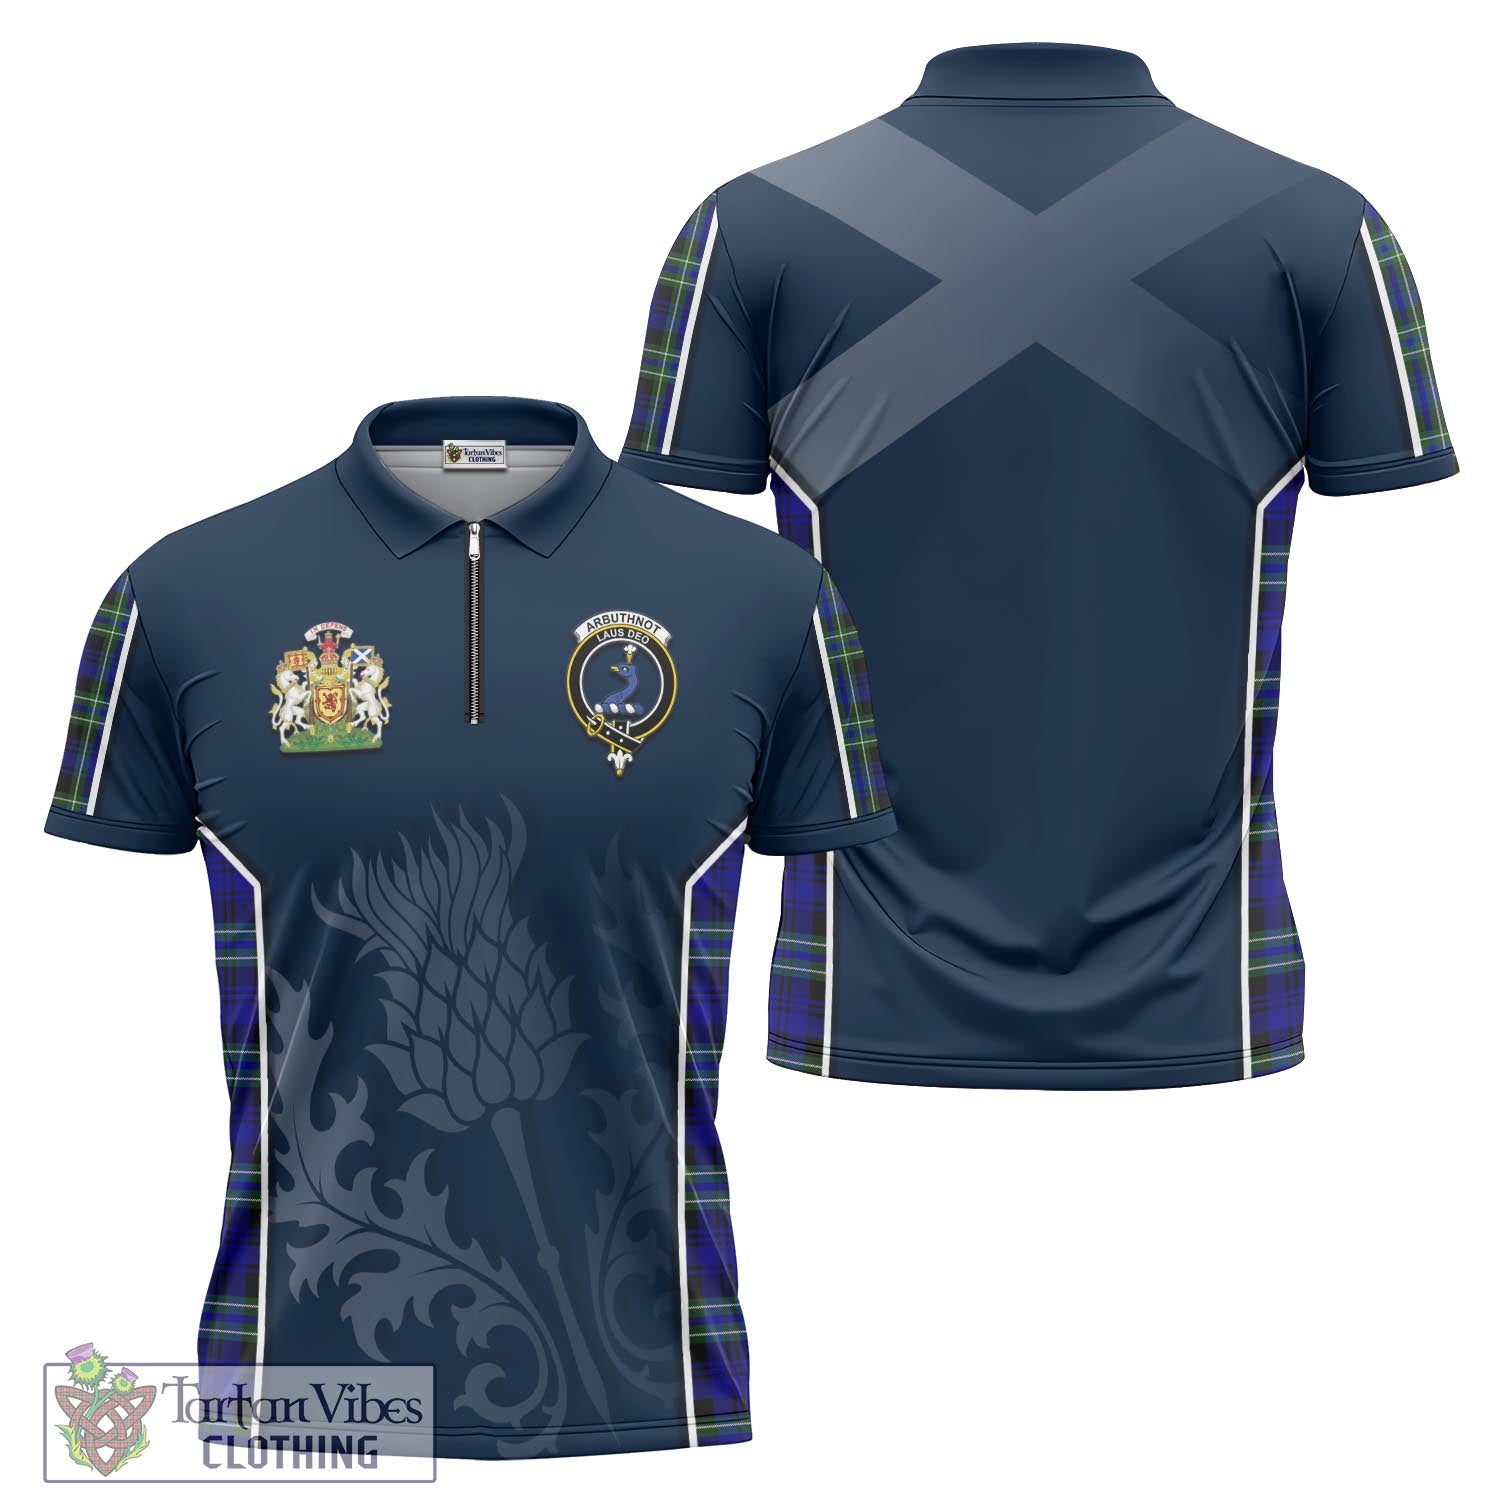 Tartan Vibes Clothing Arbuthnot Modern Tartan Zipper Polo Shirt with Family Crest and Scottish Thistle Vibes Sport Style